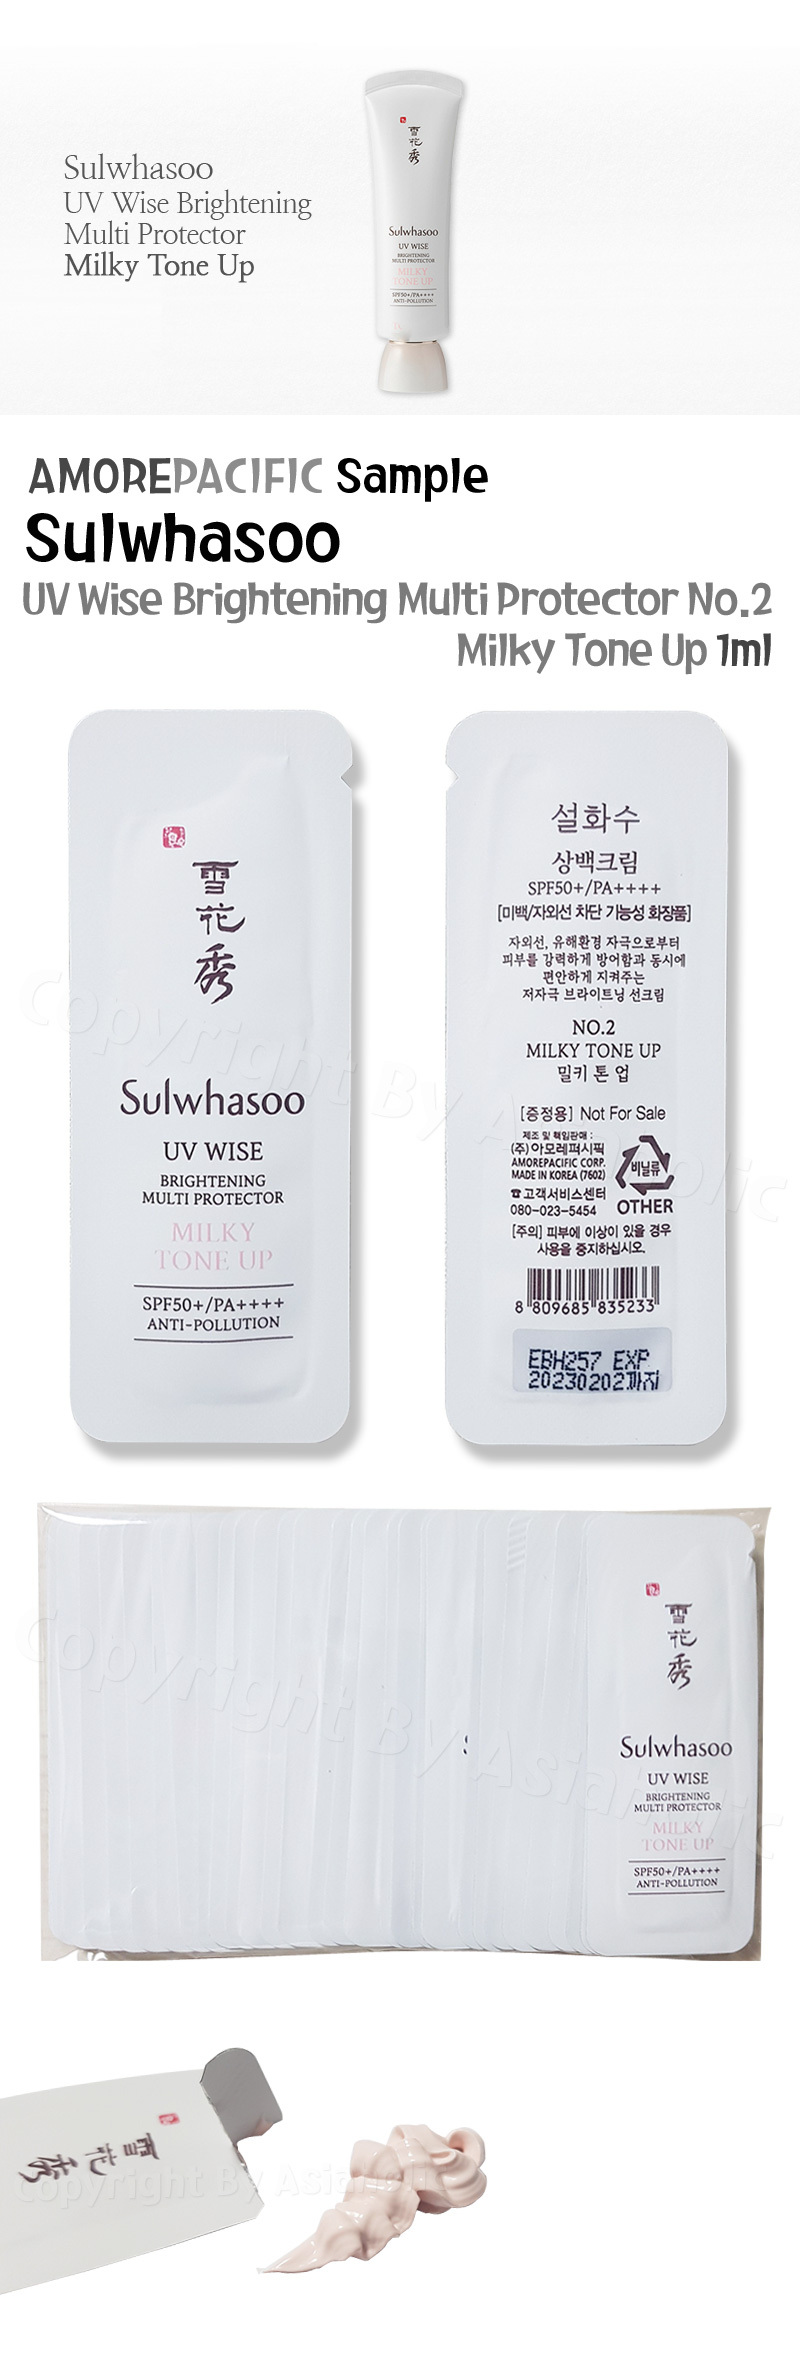 Sulwhasoo UV Wise Brightening Multi Protector No.2 Milky Tone Up 10ml x 5pcs Sample Newest Version